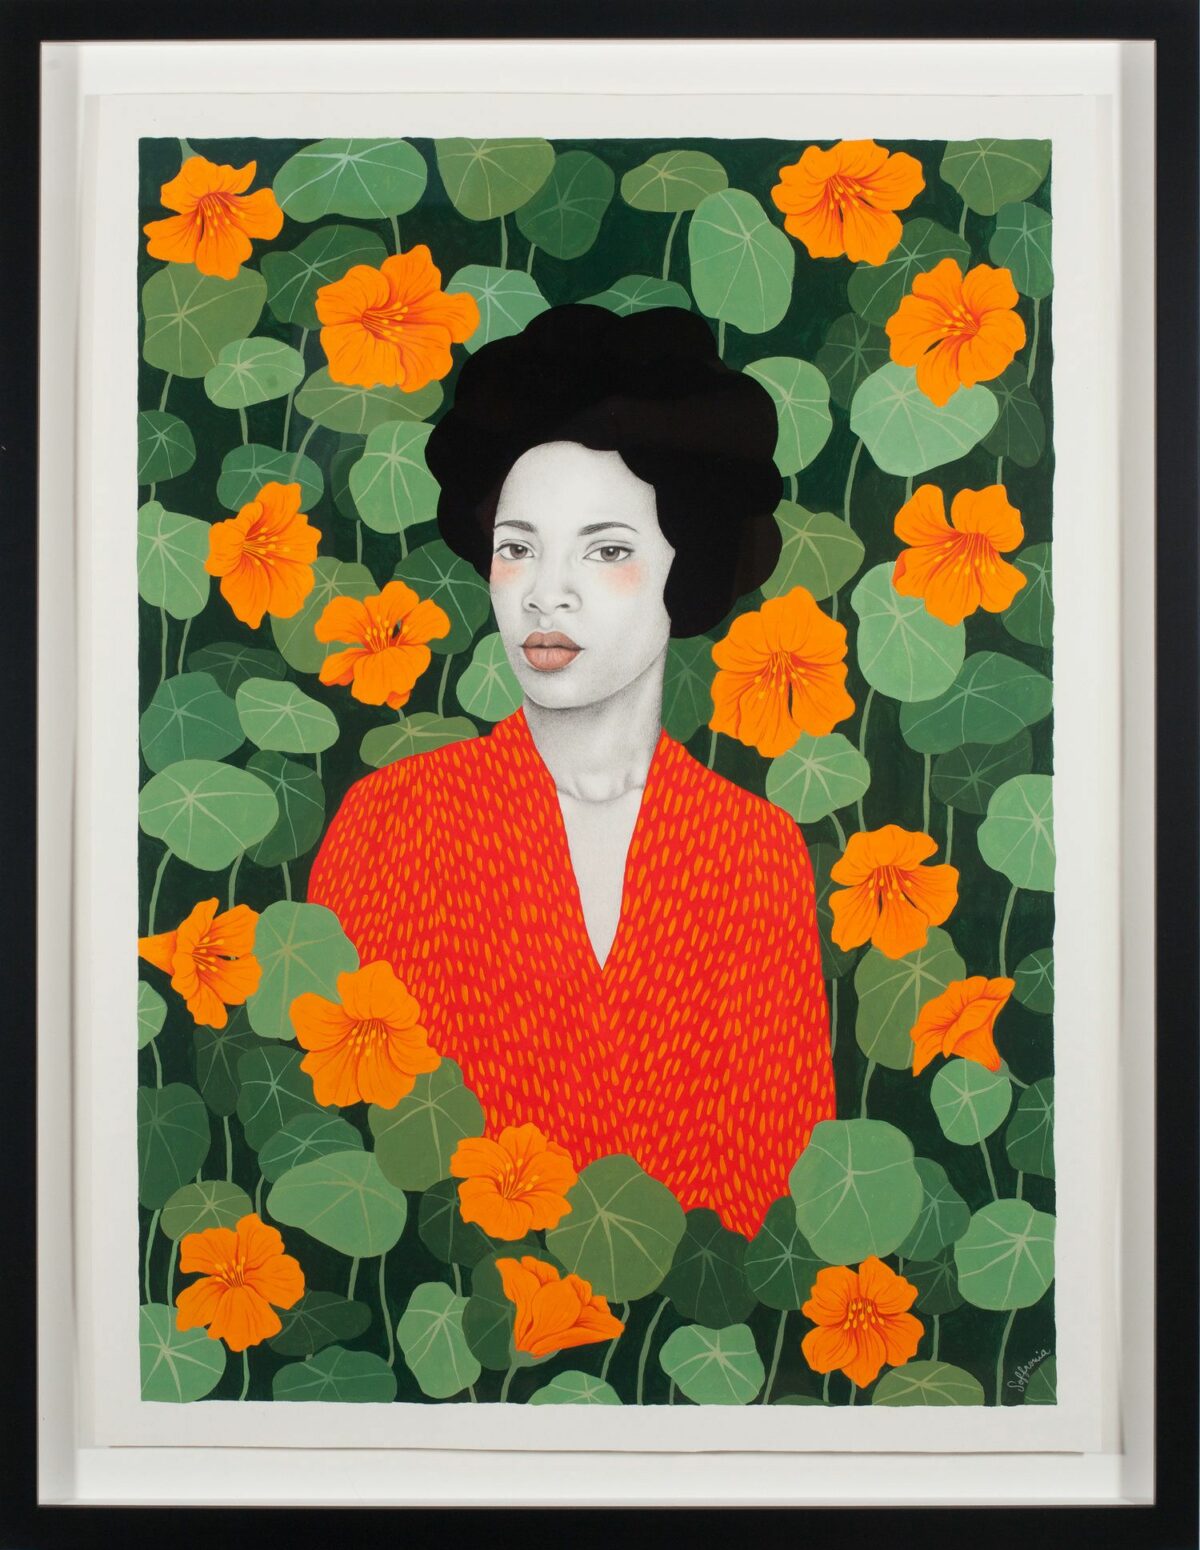 Gorgeous Female Portraits Decorated With Abstract And Floral Patterns By Sofia Bonati 10